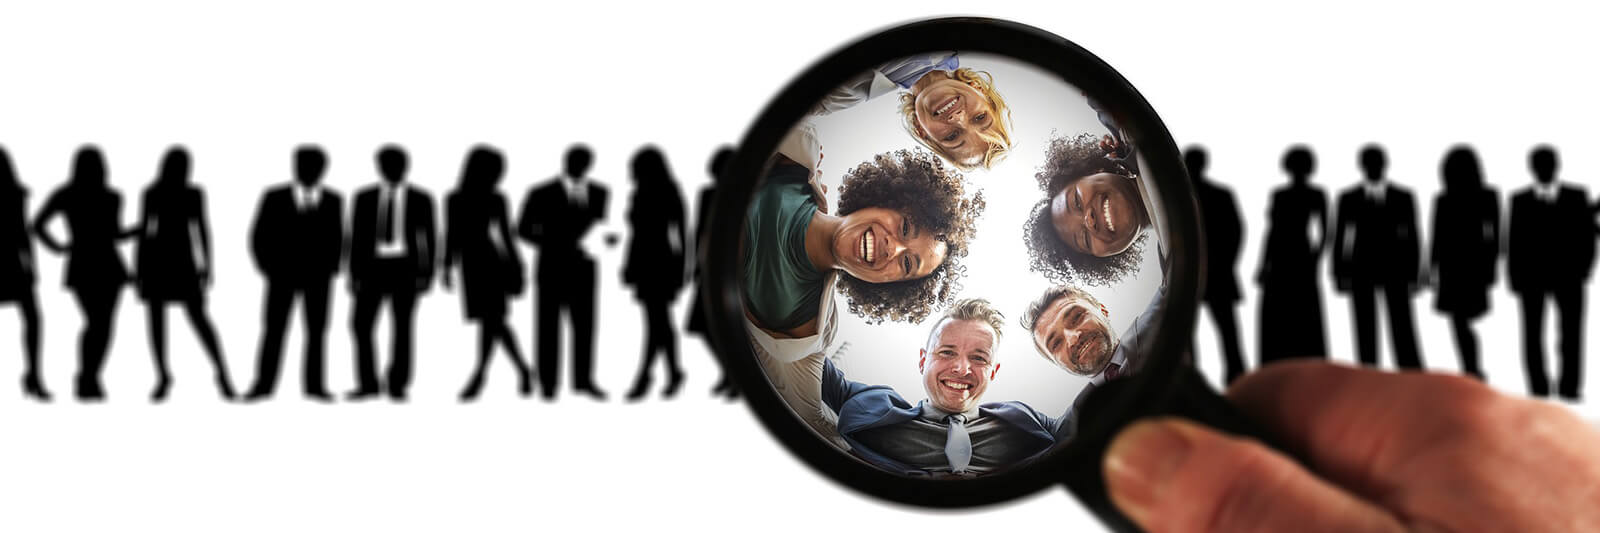 magnifying glass with 5 people smiling back